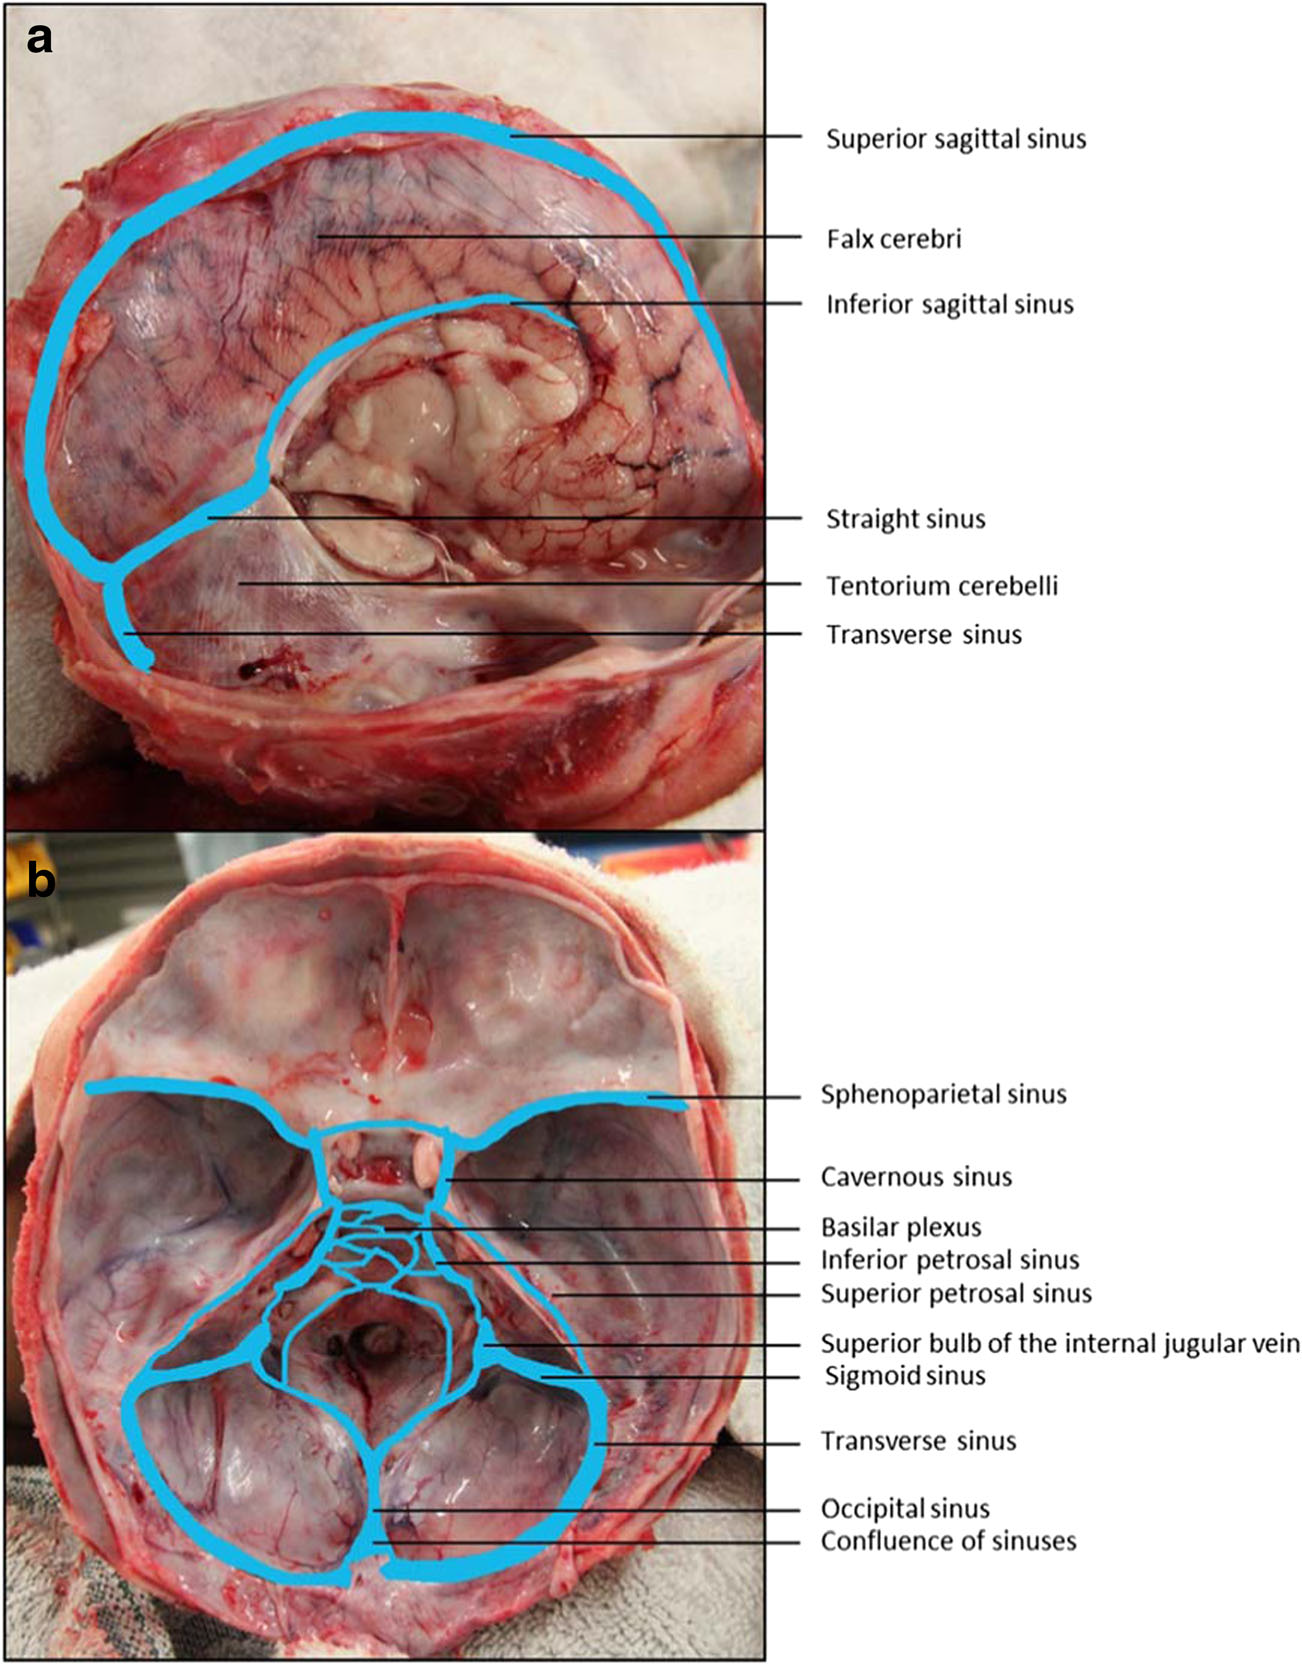 Cavernous Sinus Anatomy And Clinical Relevance Lecturio